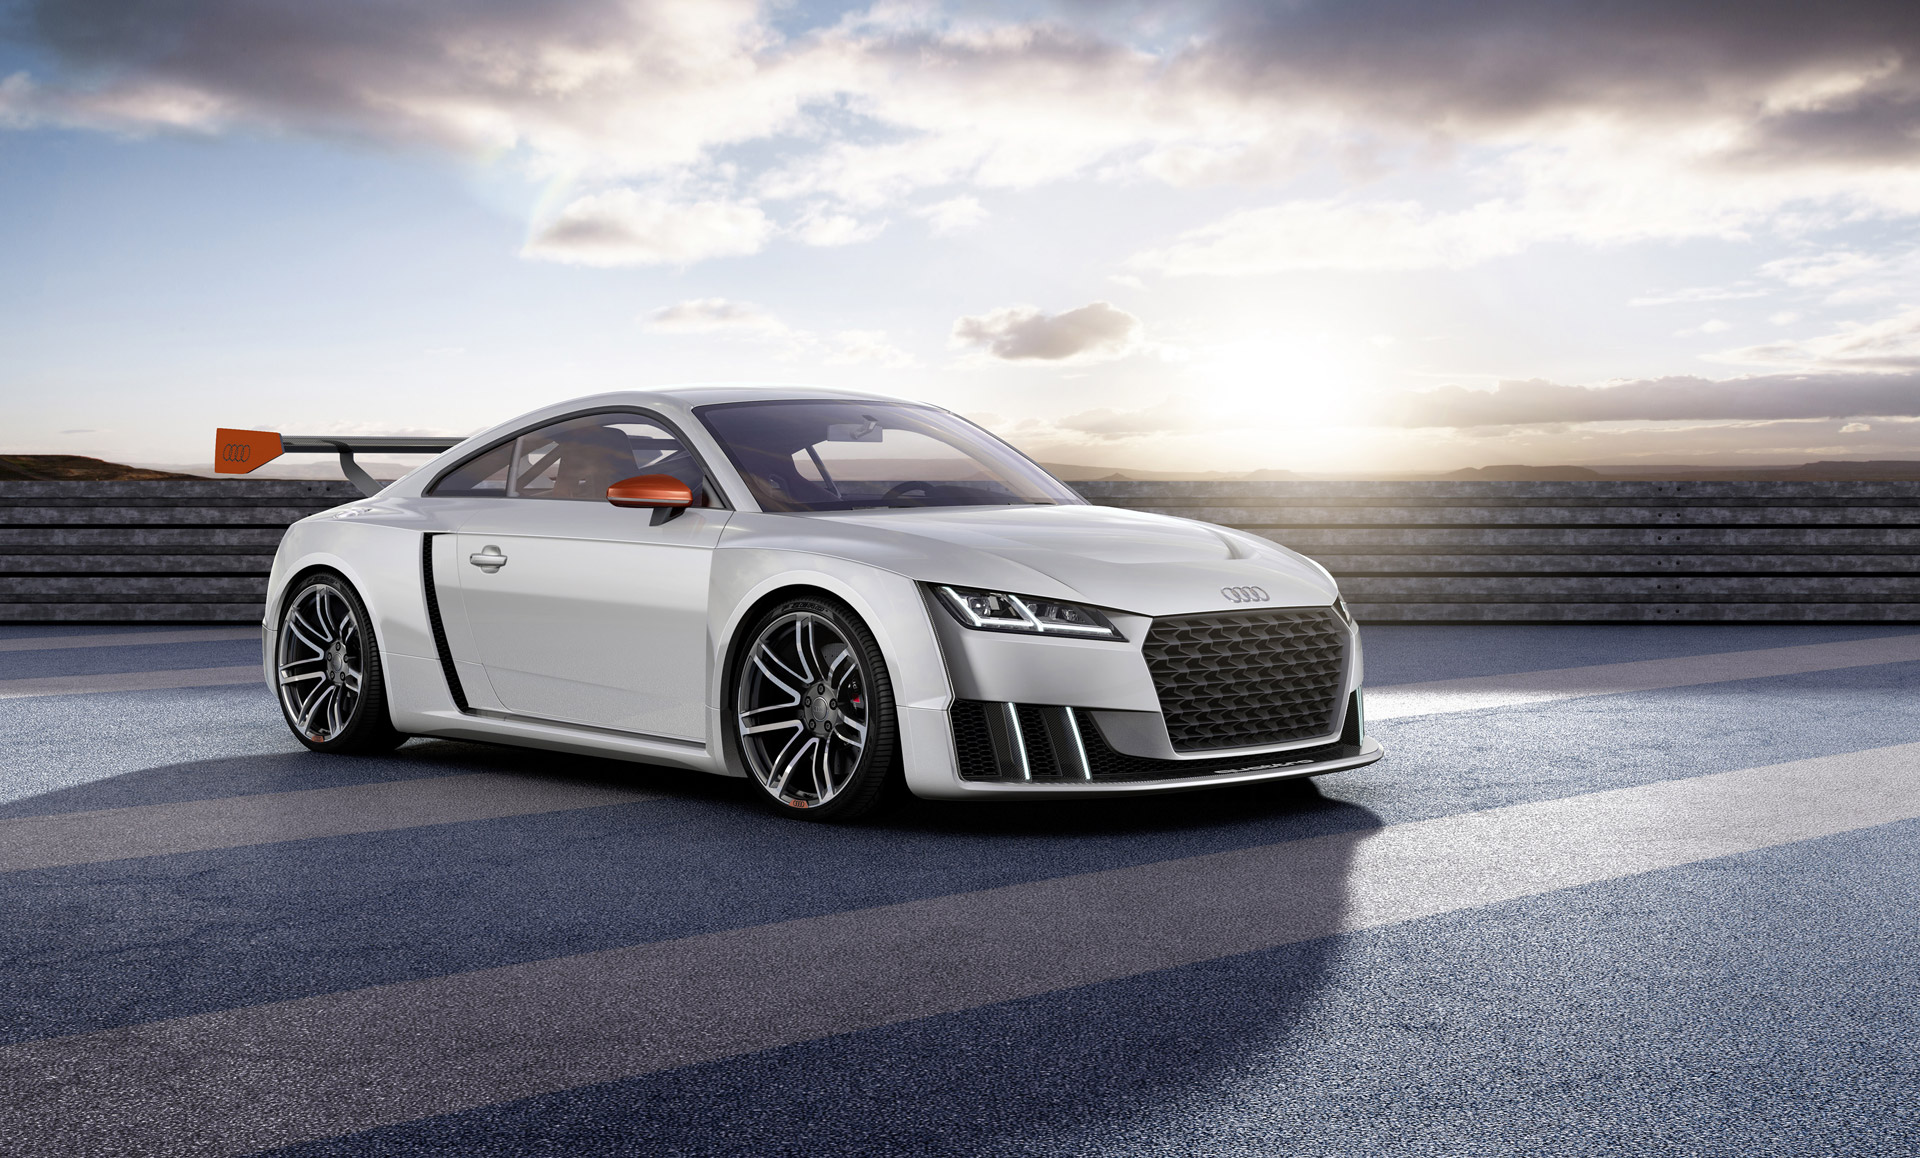 600-HP Audi TT Clubsport Turbo Concept Heads To Wörthersee ...